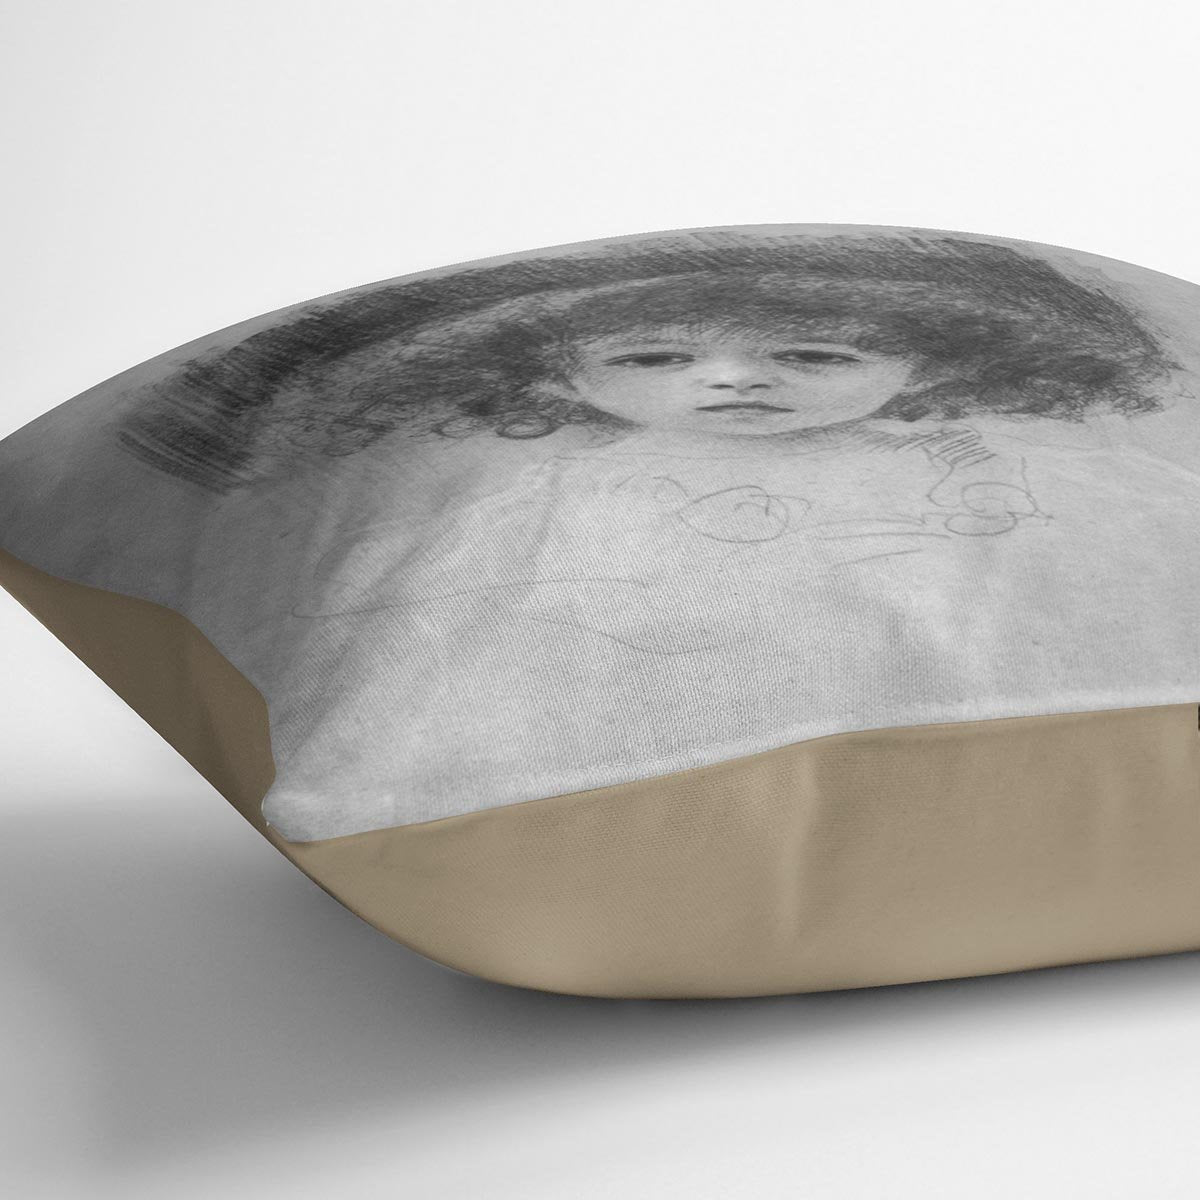 Breast image of a child by Klimt Throw Pillow